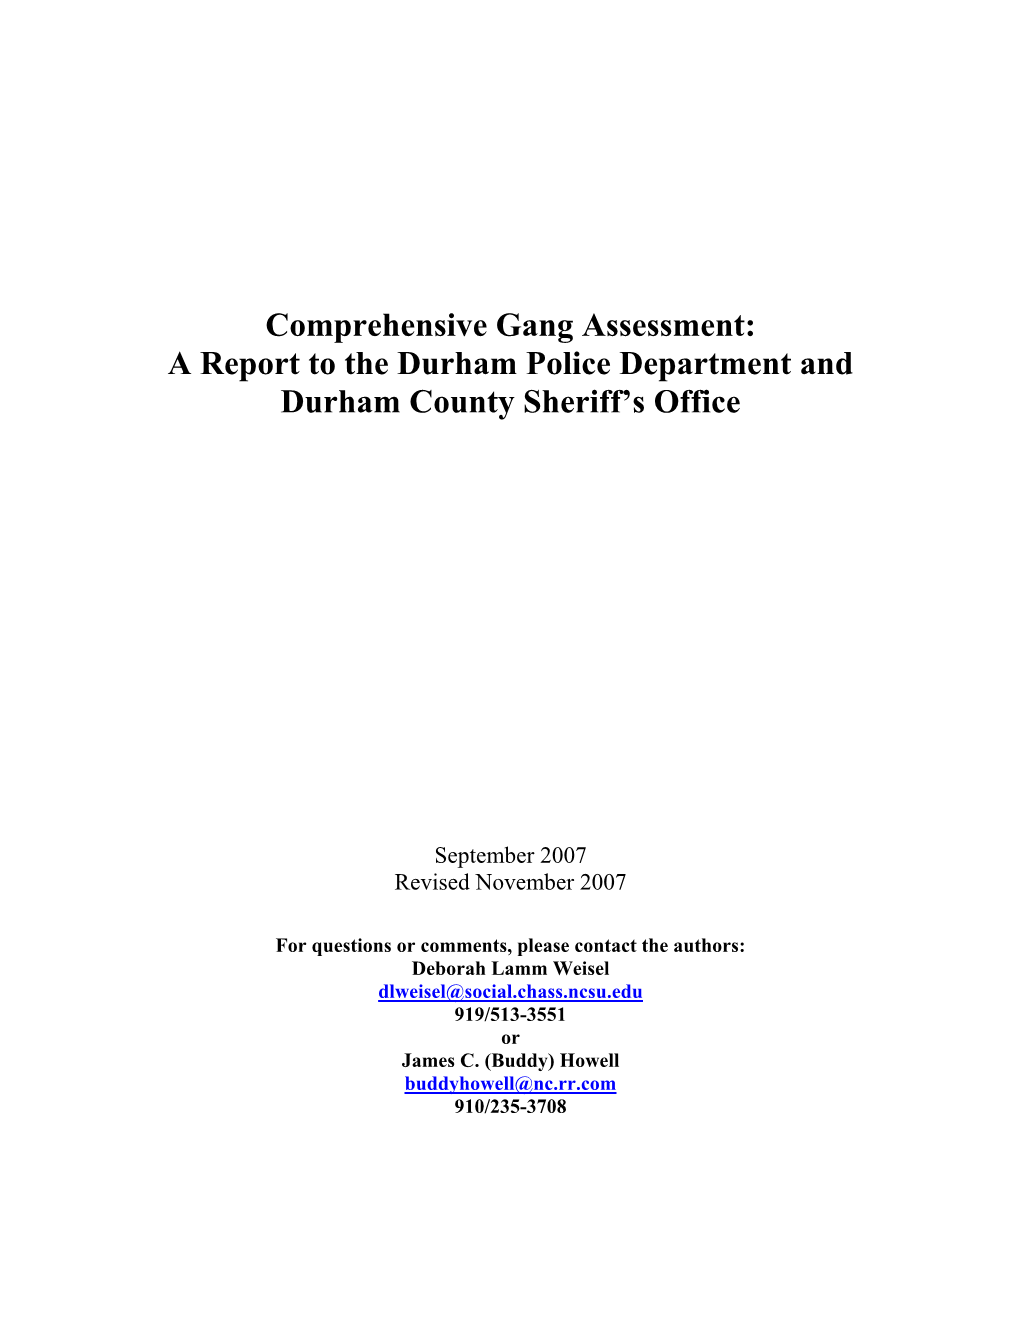 Comprehensive Gang Assessment: a Report to the Durham Police Department and Durham County Sheriff’S Office